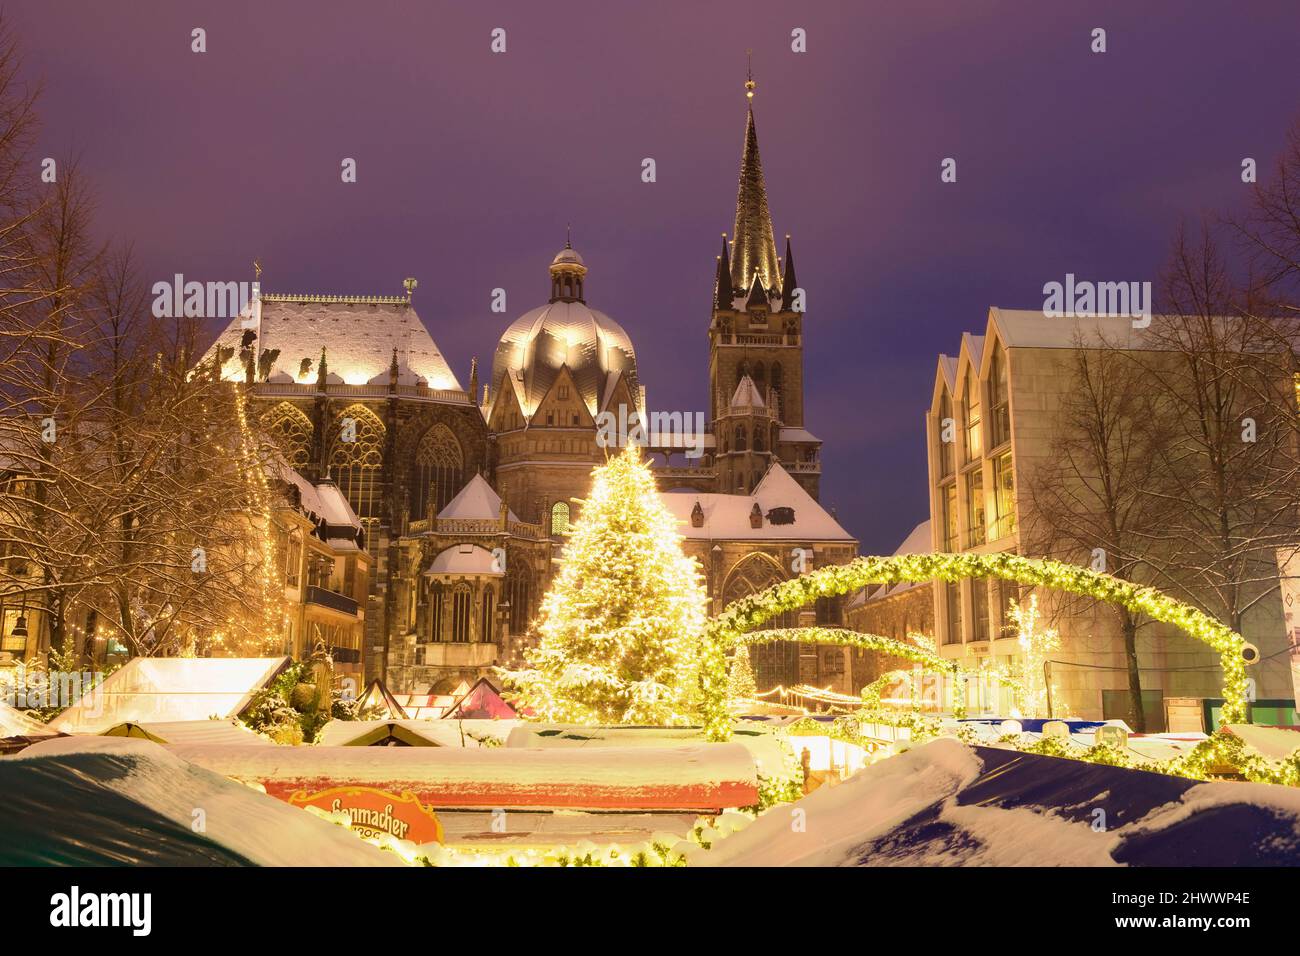 Aachen Christmas market and cathedral, Aachen, Germany Stock Photo